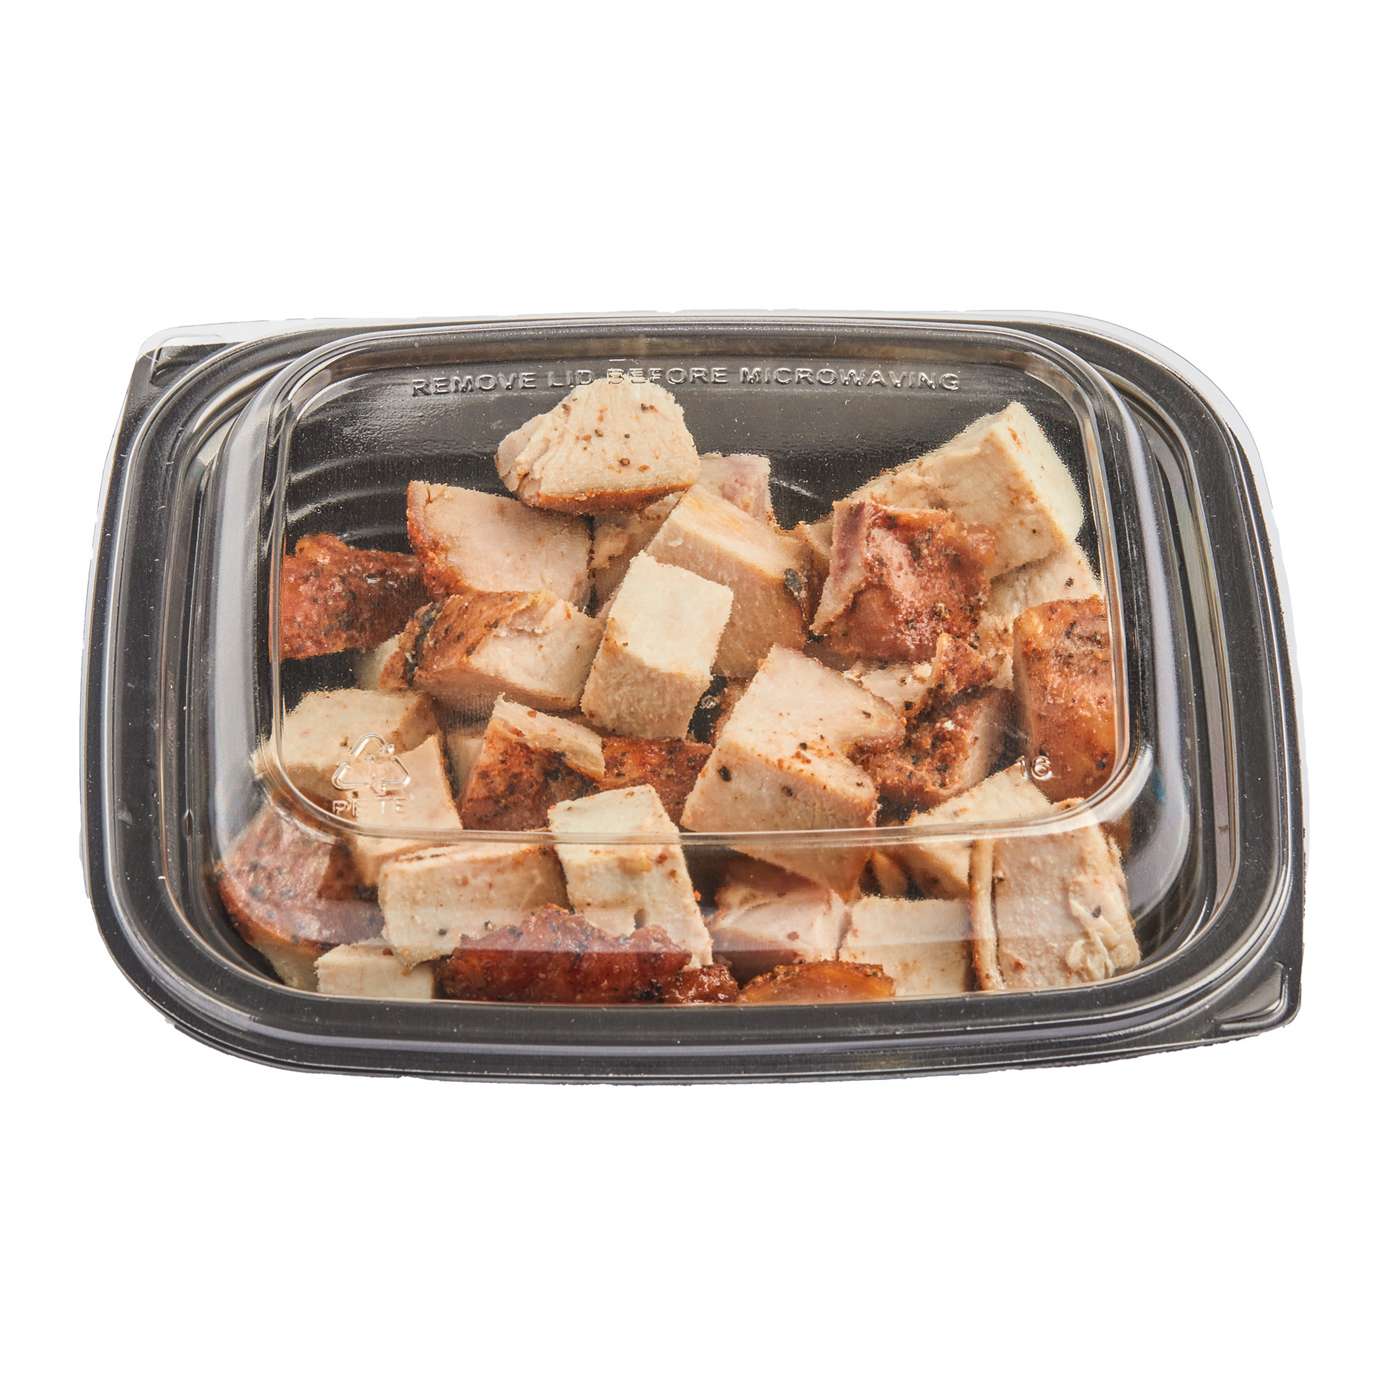 True Texas BBQ Cubed Smoked Turkey (Sold Cold); image 1 of 2